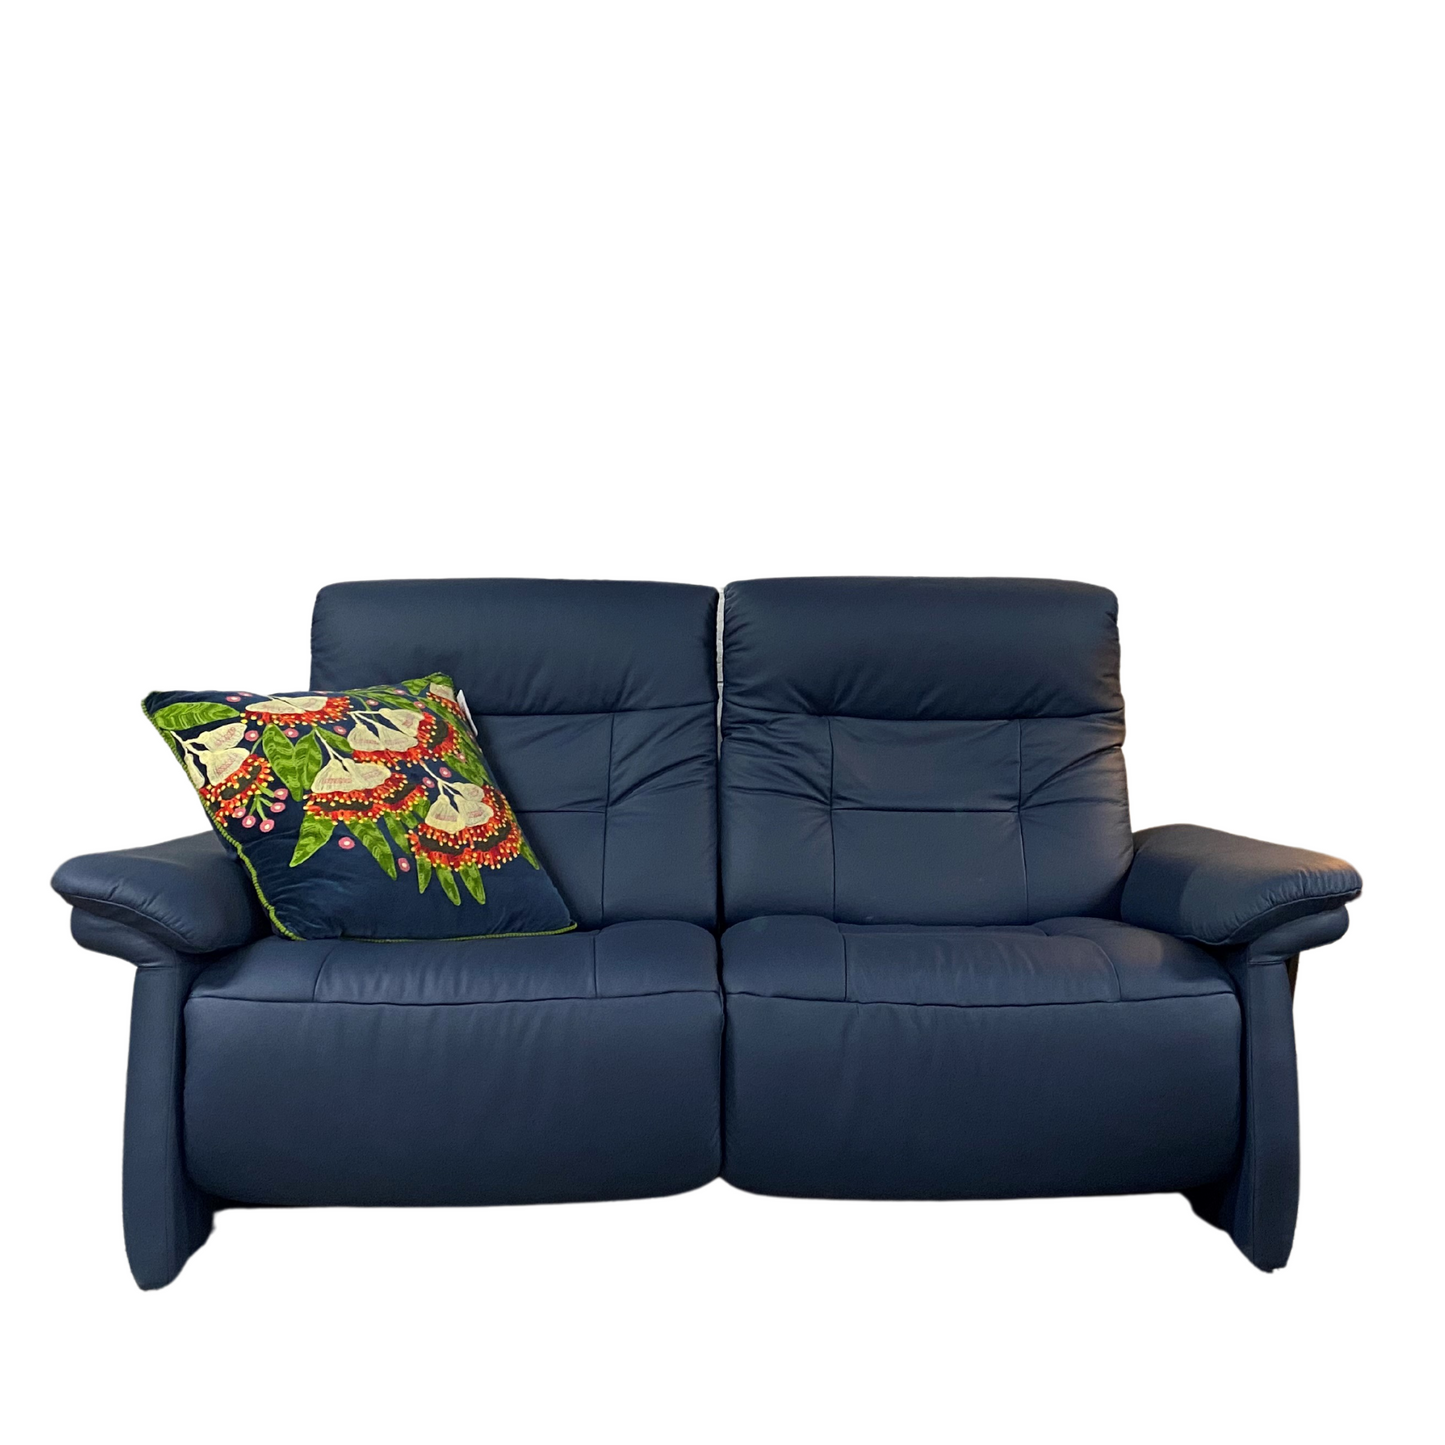 Mary 2 Seater Sofa by Stressless